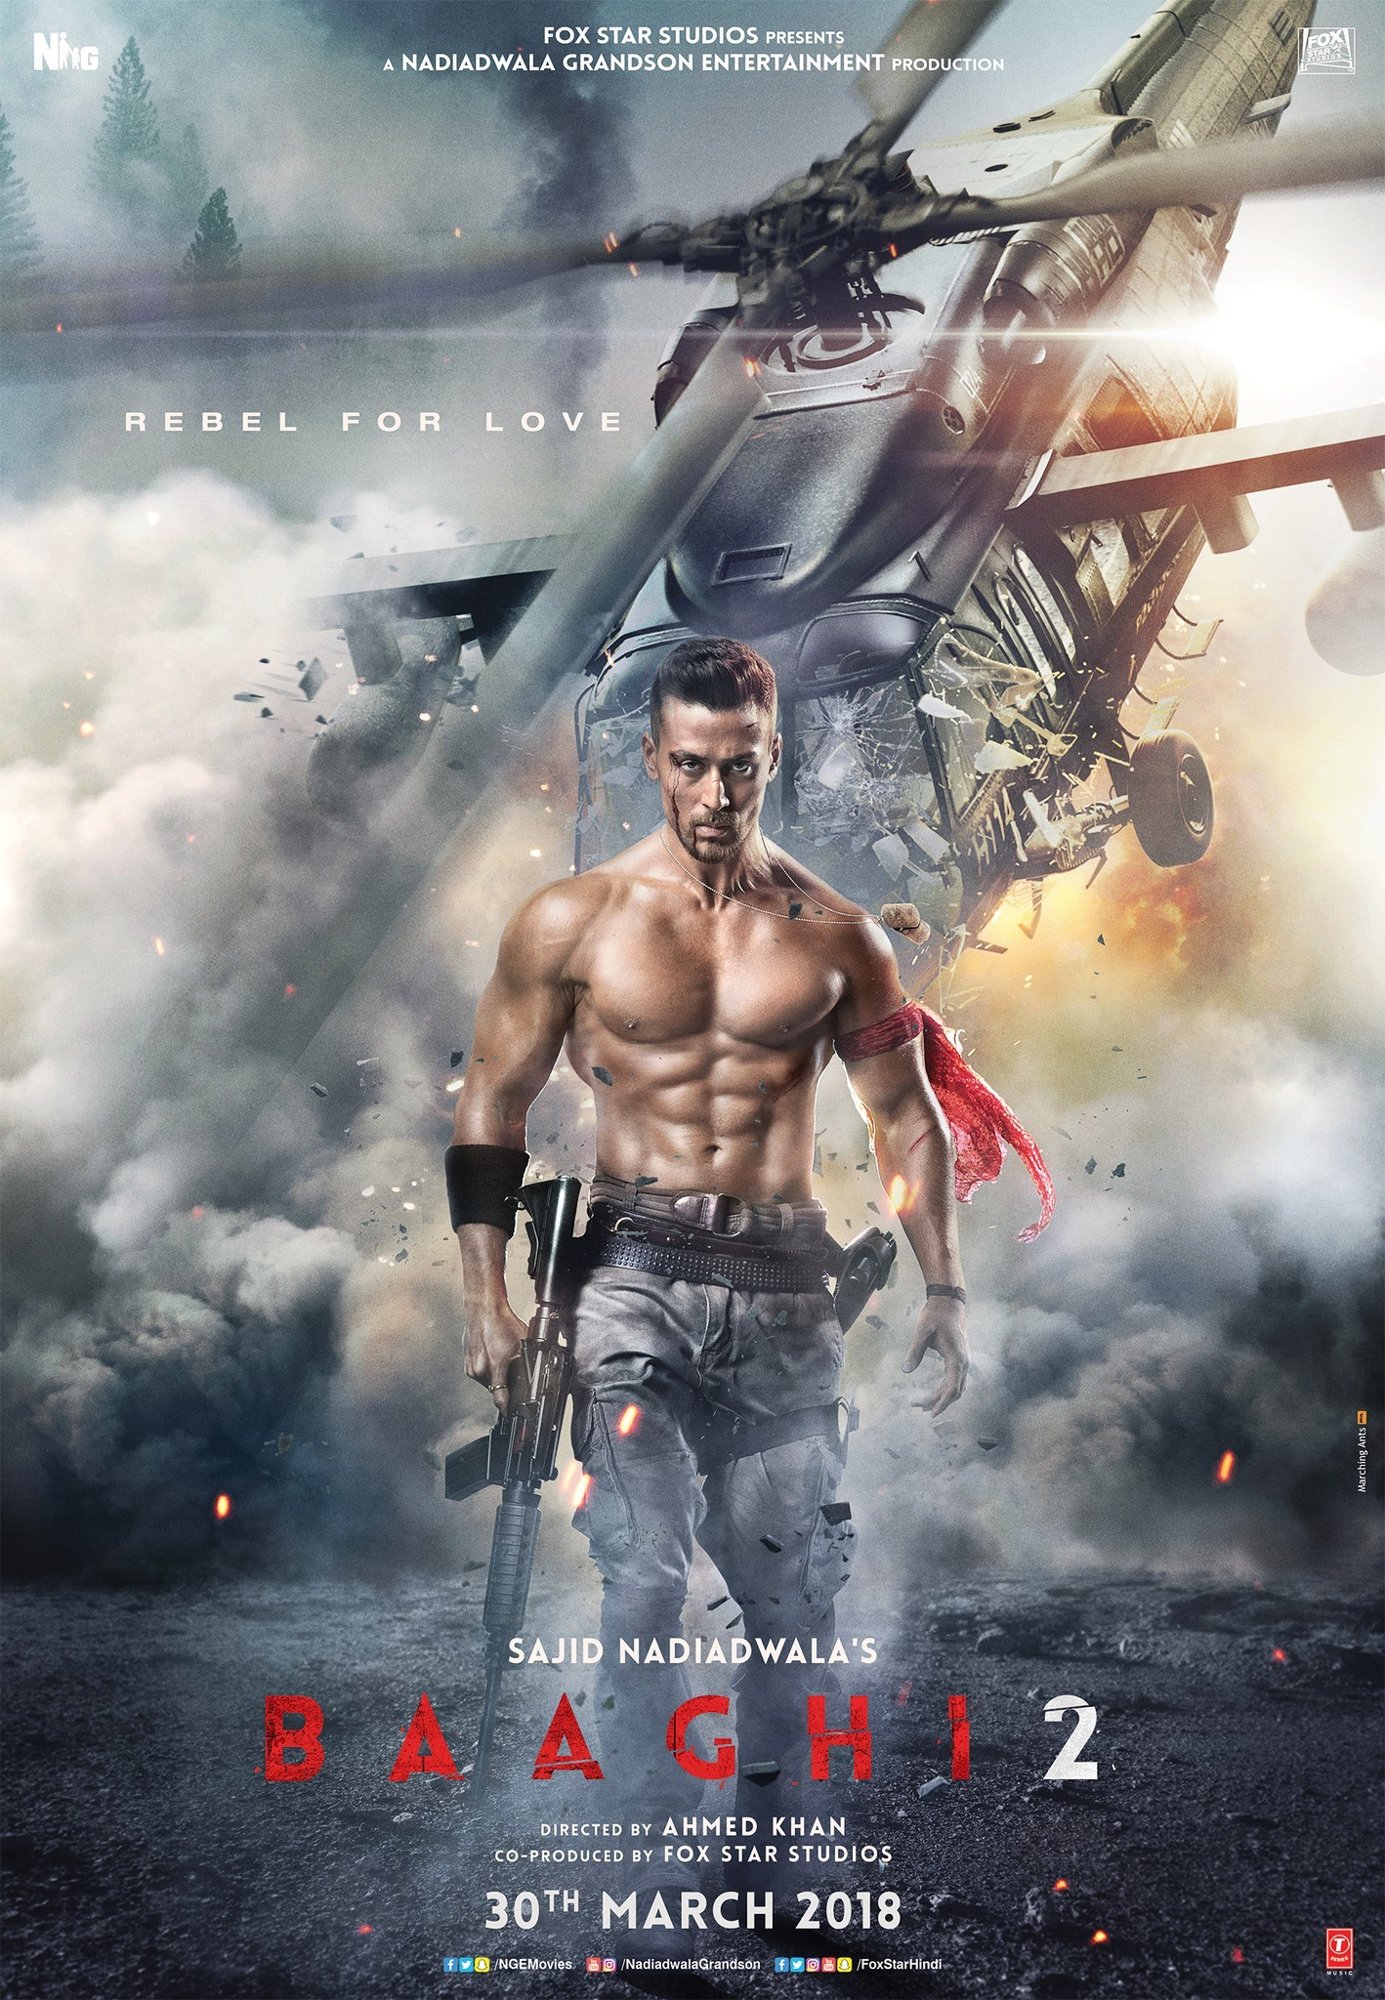 Baaghi Pictures Trailer Reviews News Dvd And Soundtrack